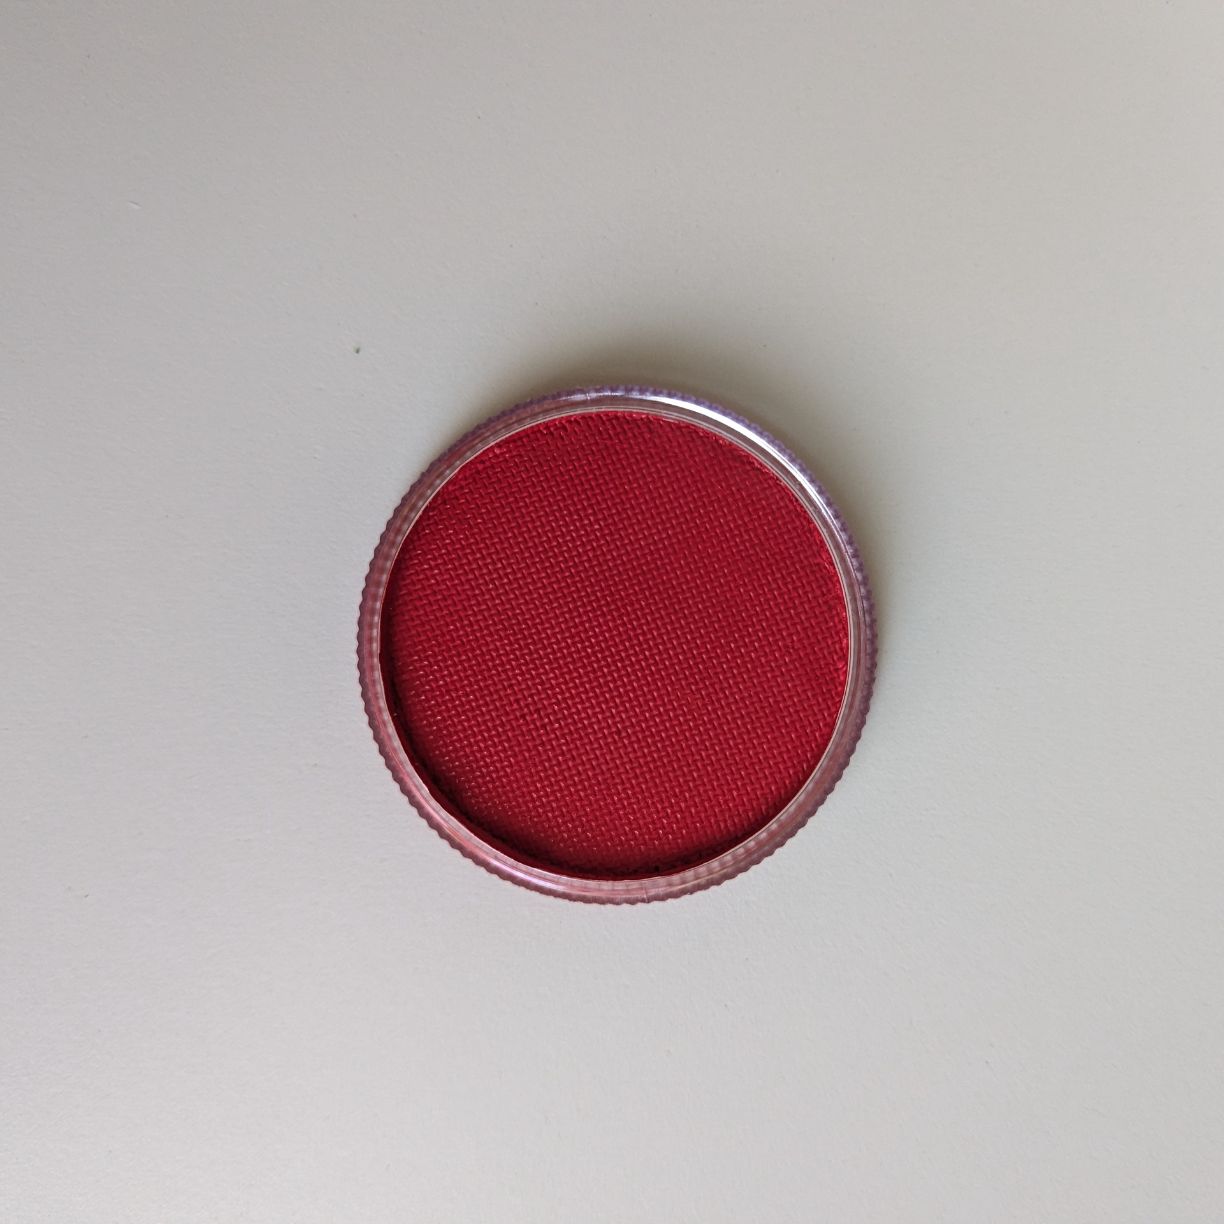 Baseline "Berry Red"